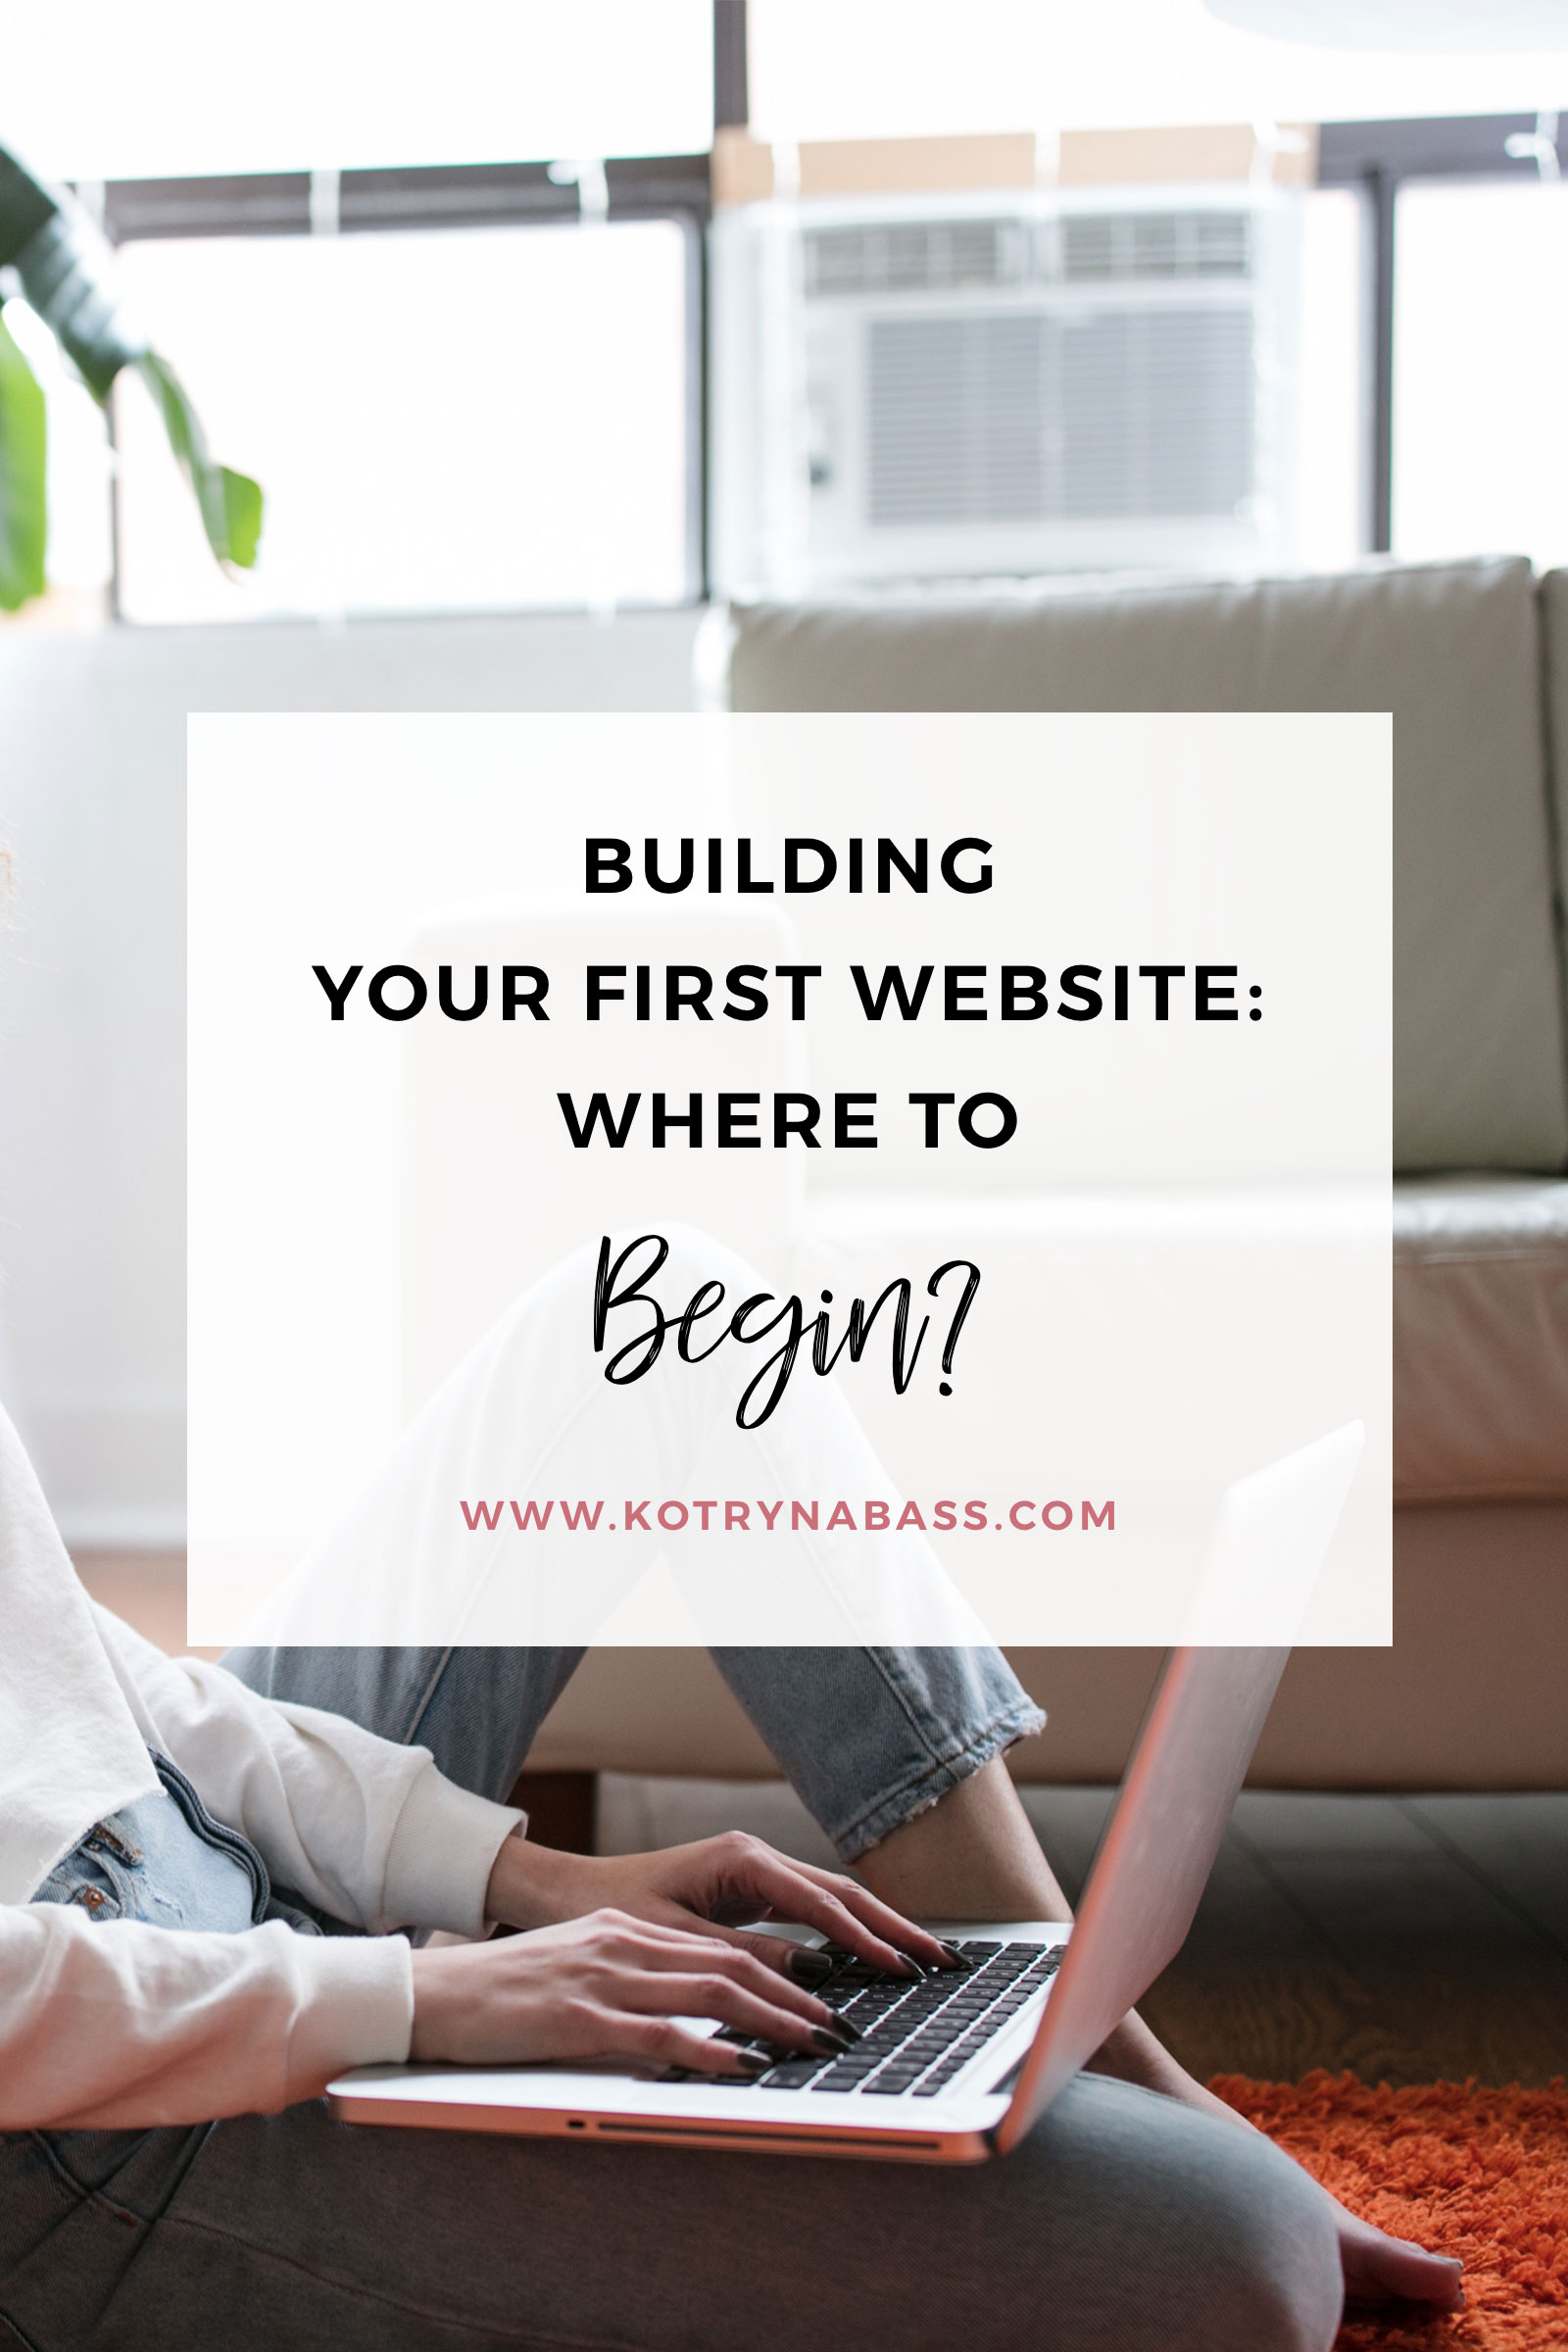 Building Your First Website Where To Begin, new website, new web, website design, how to start a website, how to build a new website, tutorial, 101